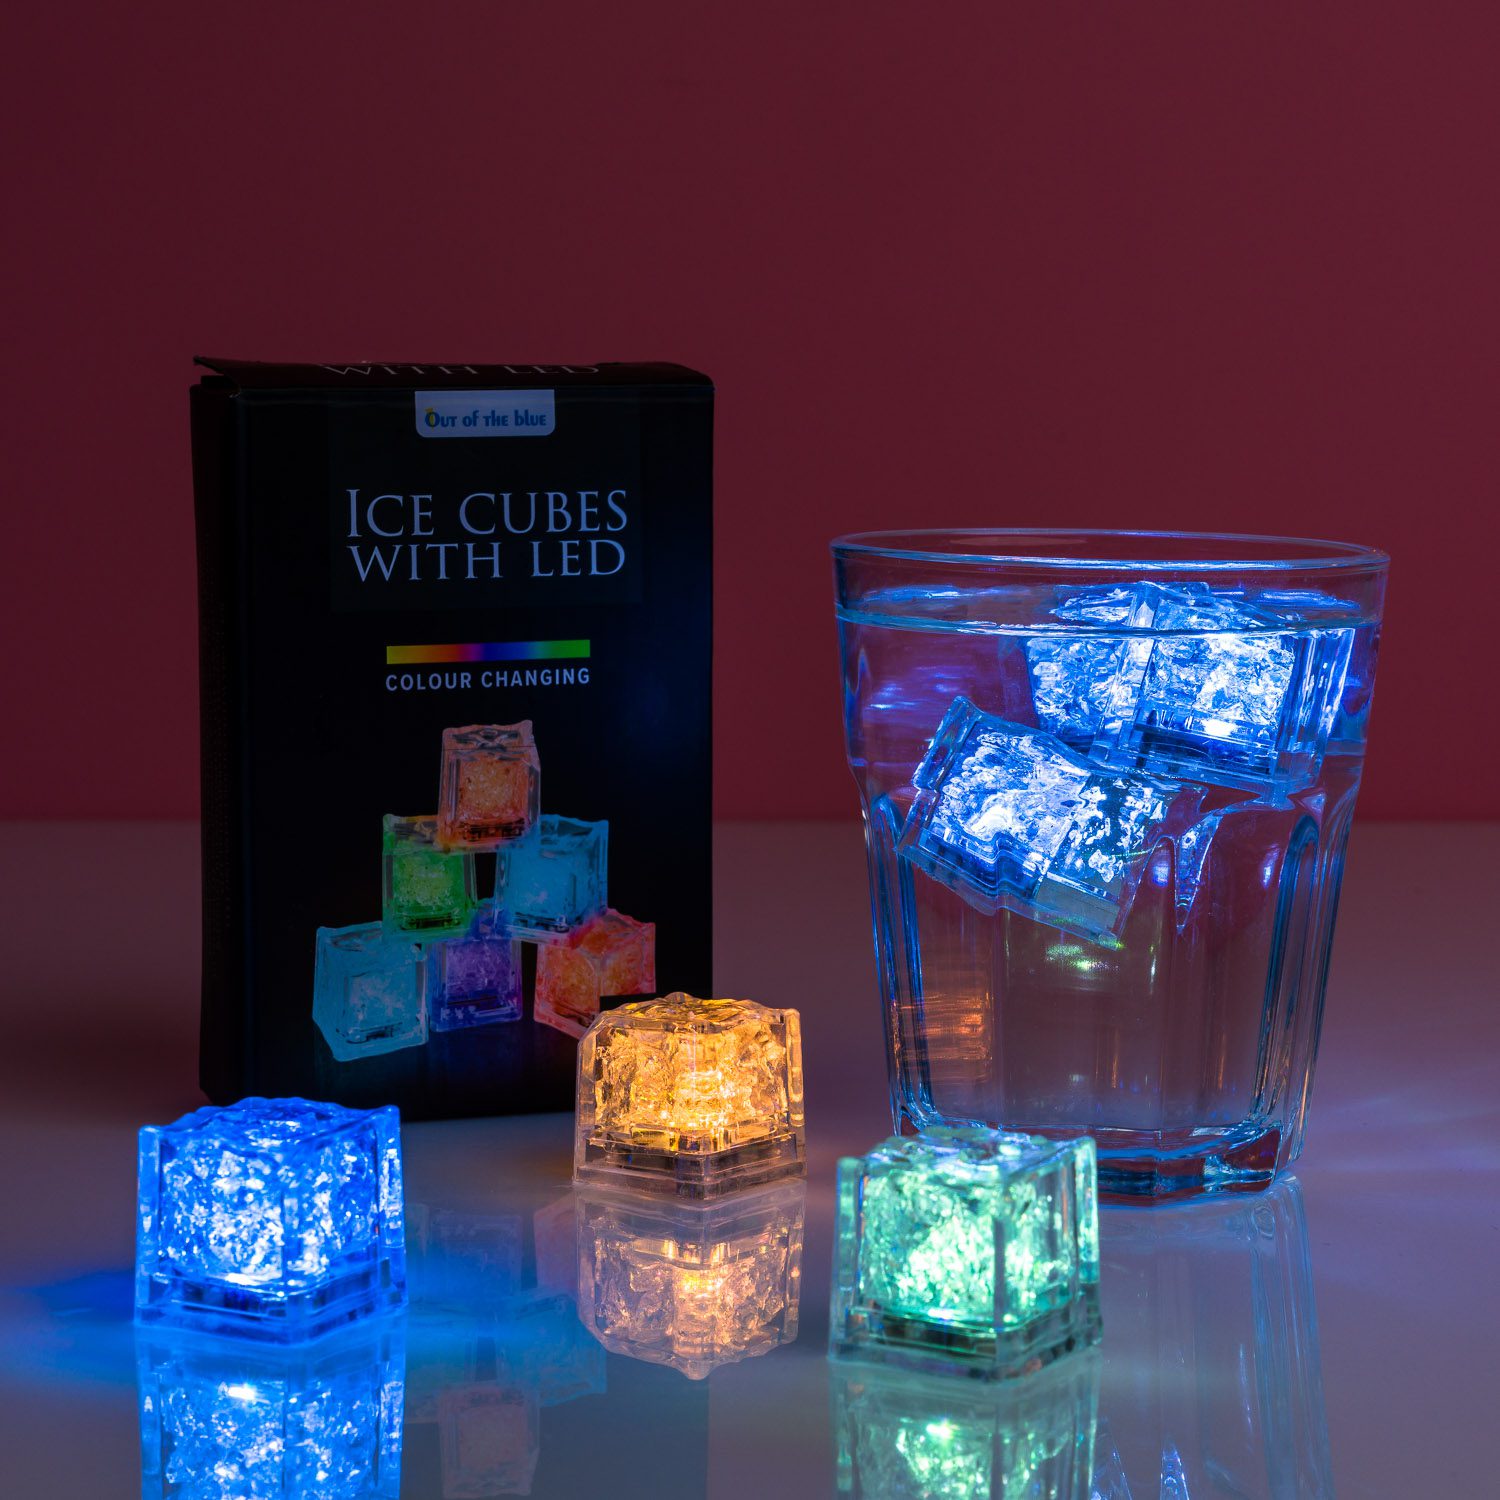 512736-Out of the blue-Plastic ice Cubes with LED-2